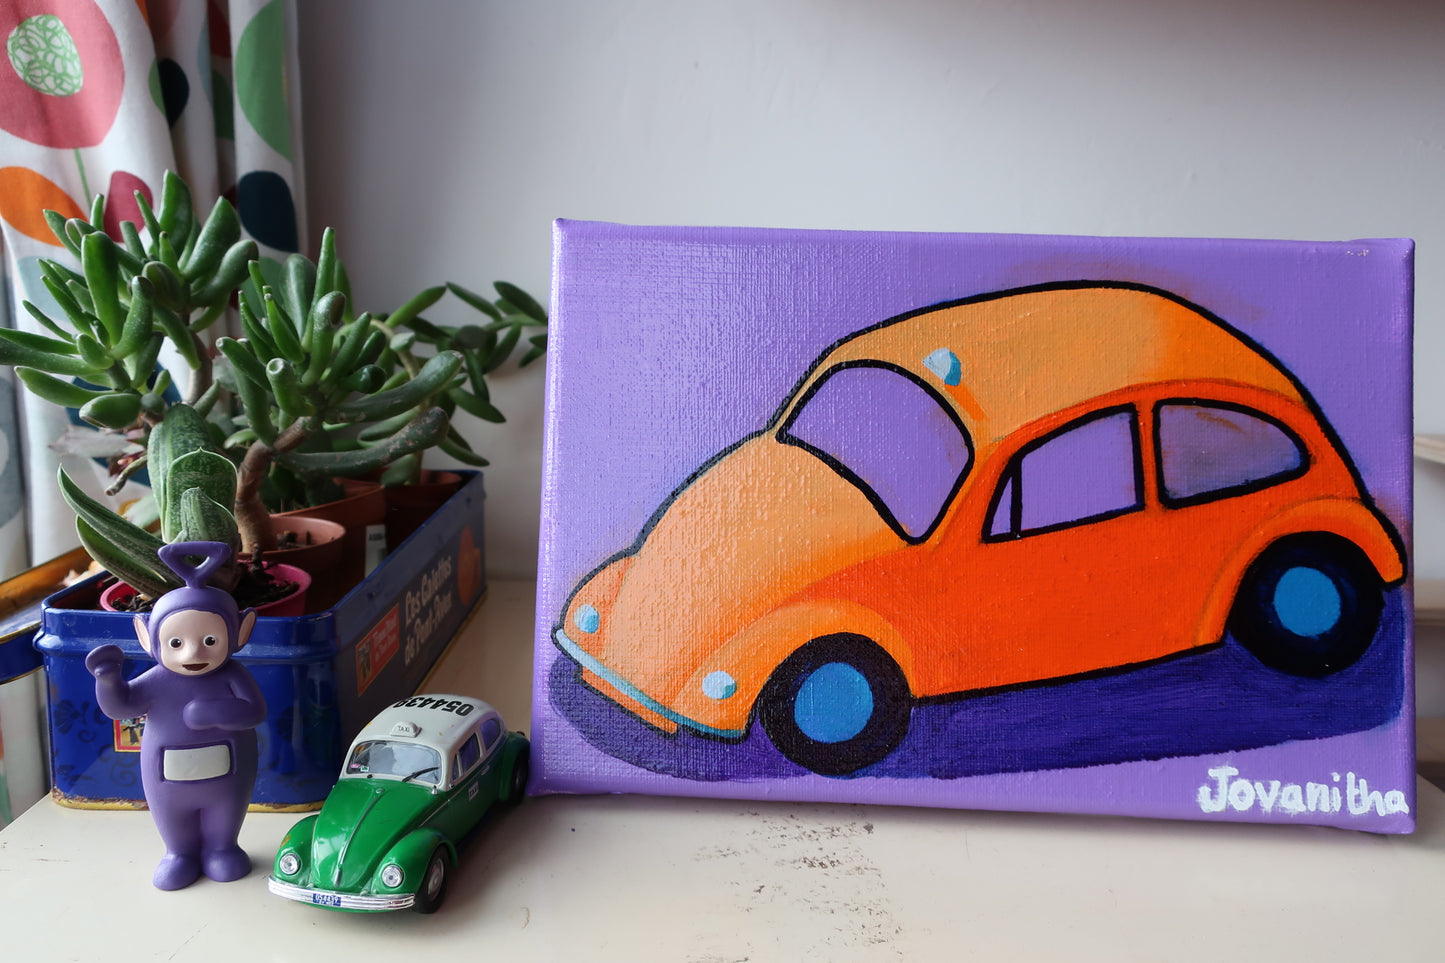 An oil painting of an orange VW Beetle car against a violet background on a white shelf